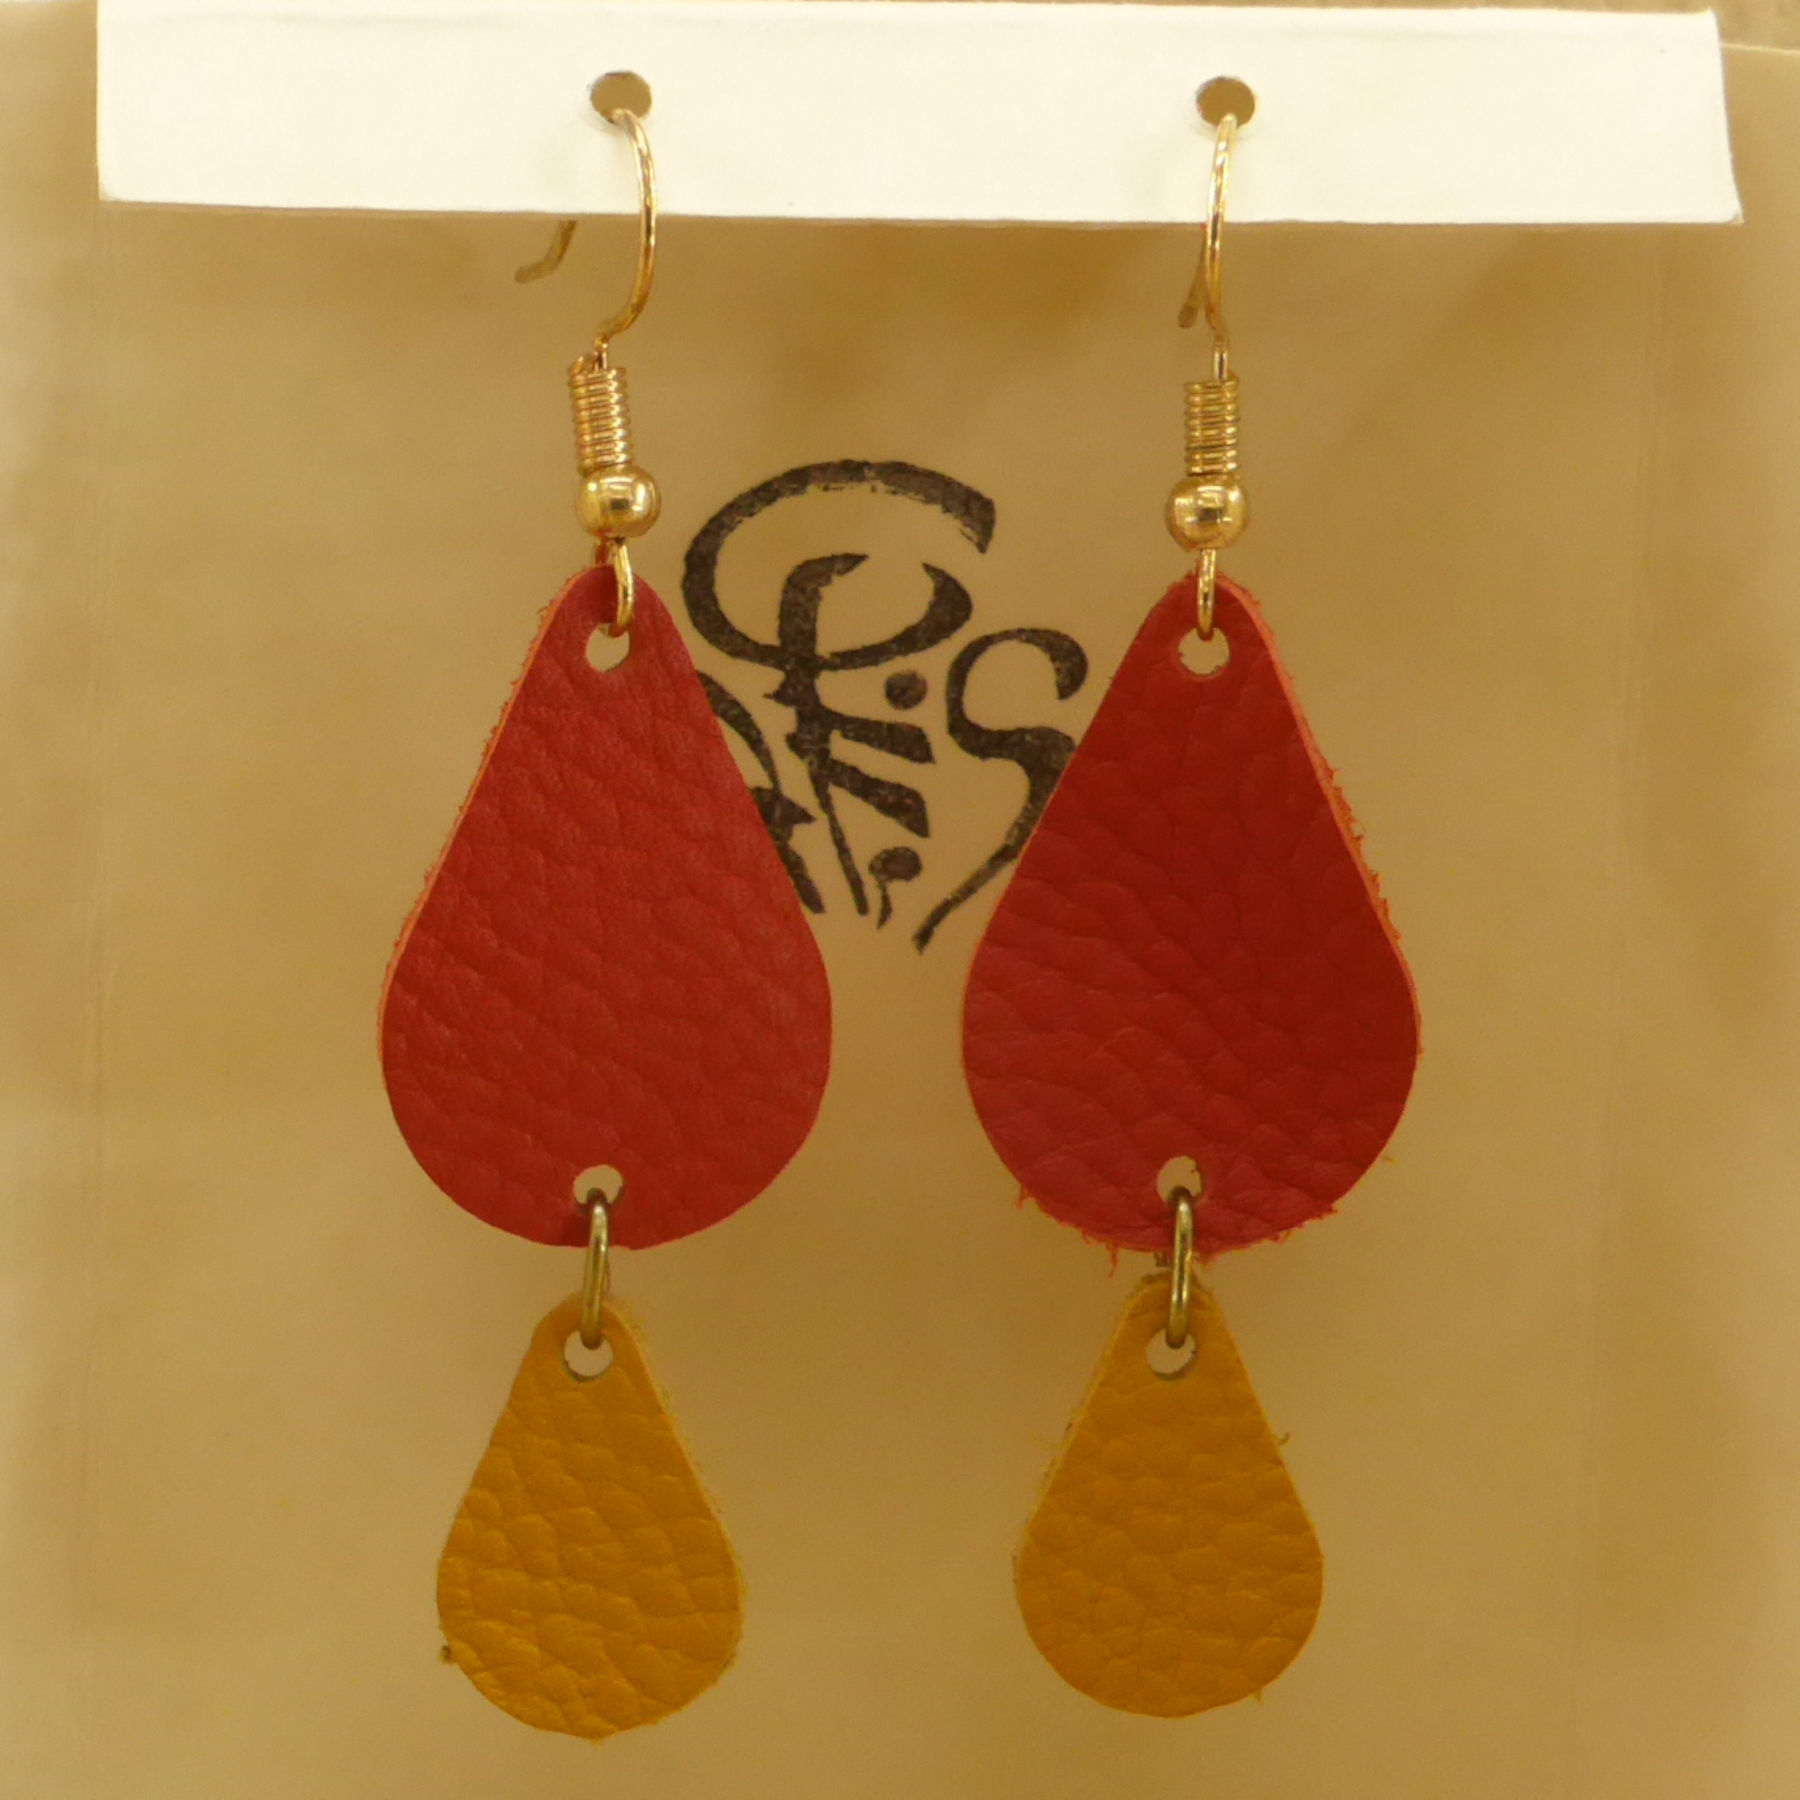 Contemporary red and fawn leather earrings, Water drop